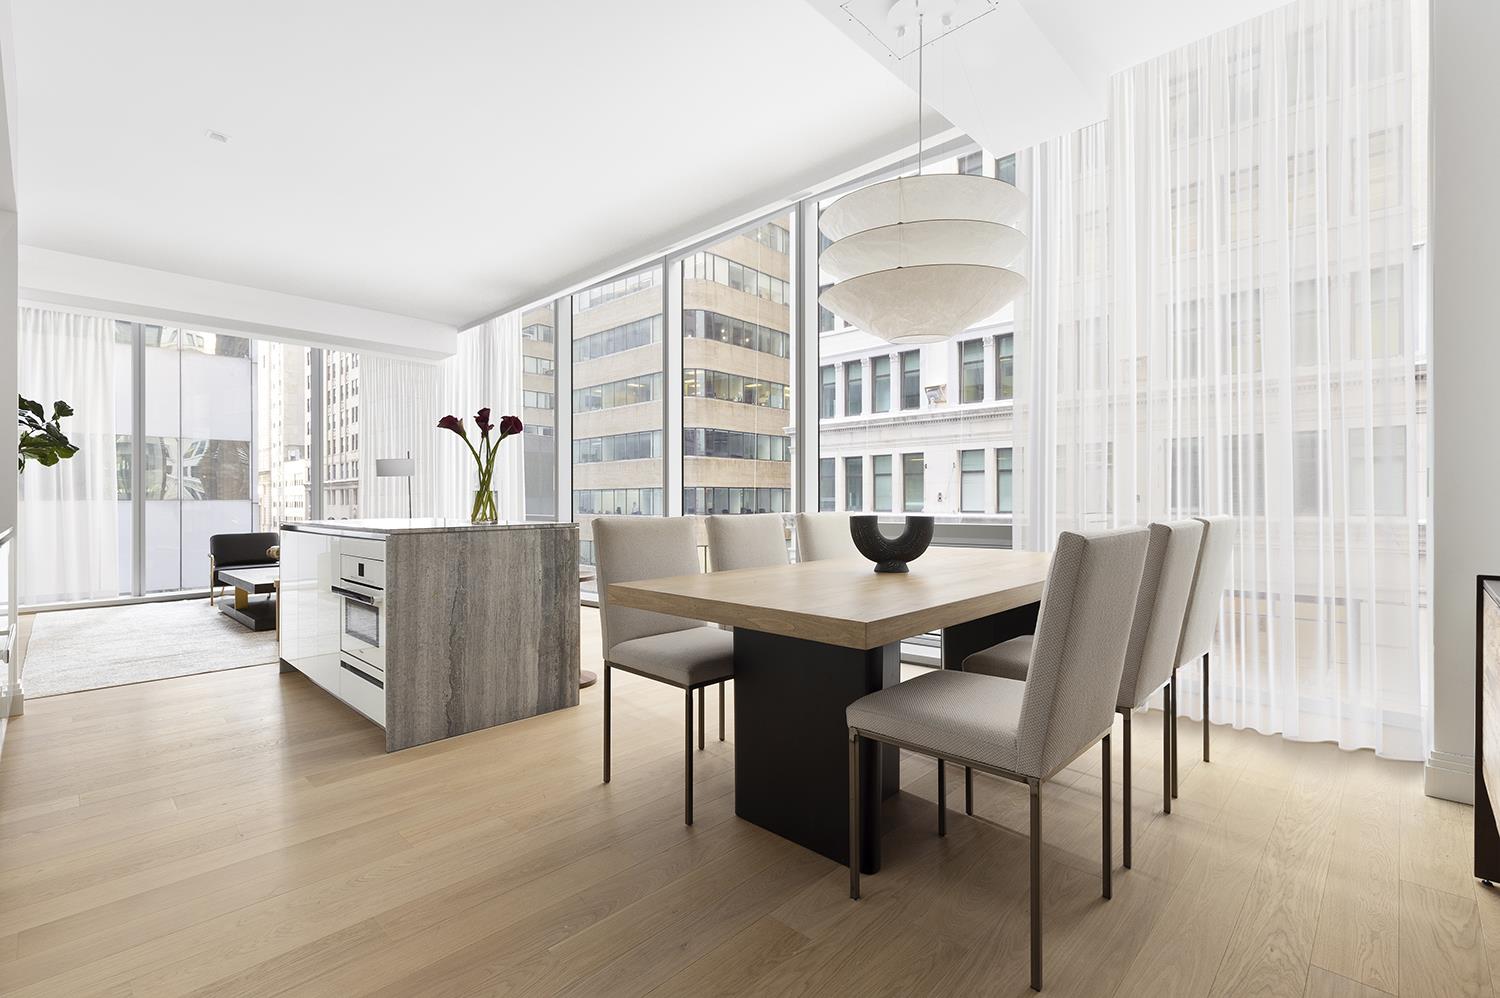 1 Wall Street 612, Financial District, Downtown, NYC - 3 Bedrooms  
2.5 Bathrooms  
5 Rooms - 